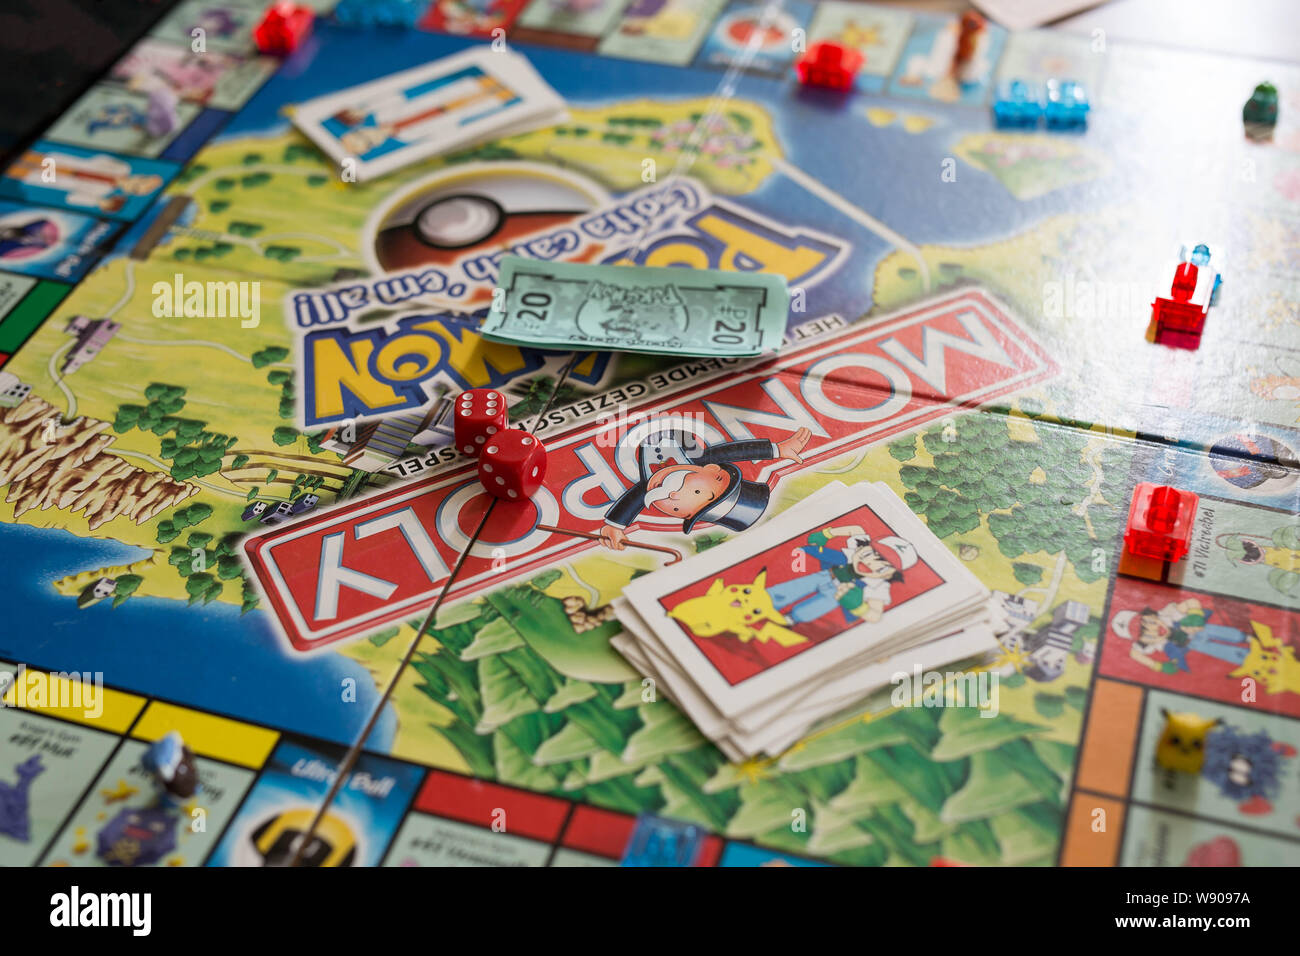 https://c8.alamy.com/comp/W9097A/monopoly-pokemon-12-august-the-netherlands-board-game-W9097A.jpg